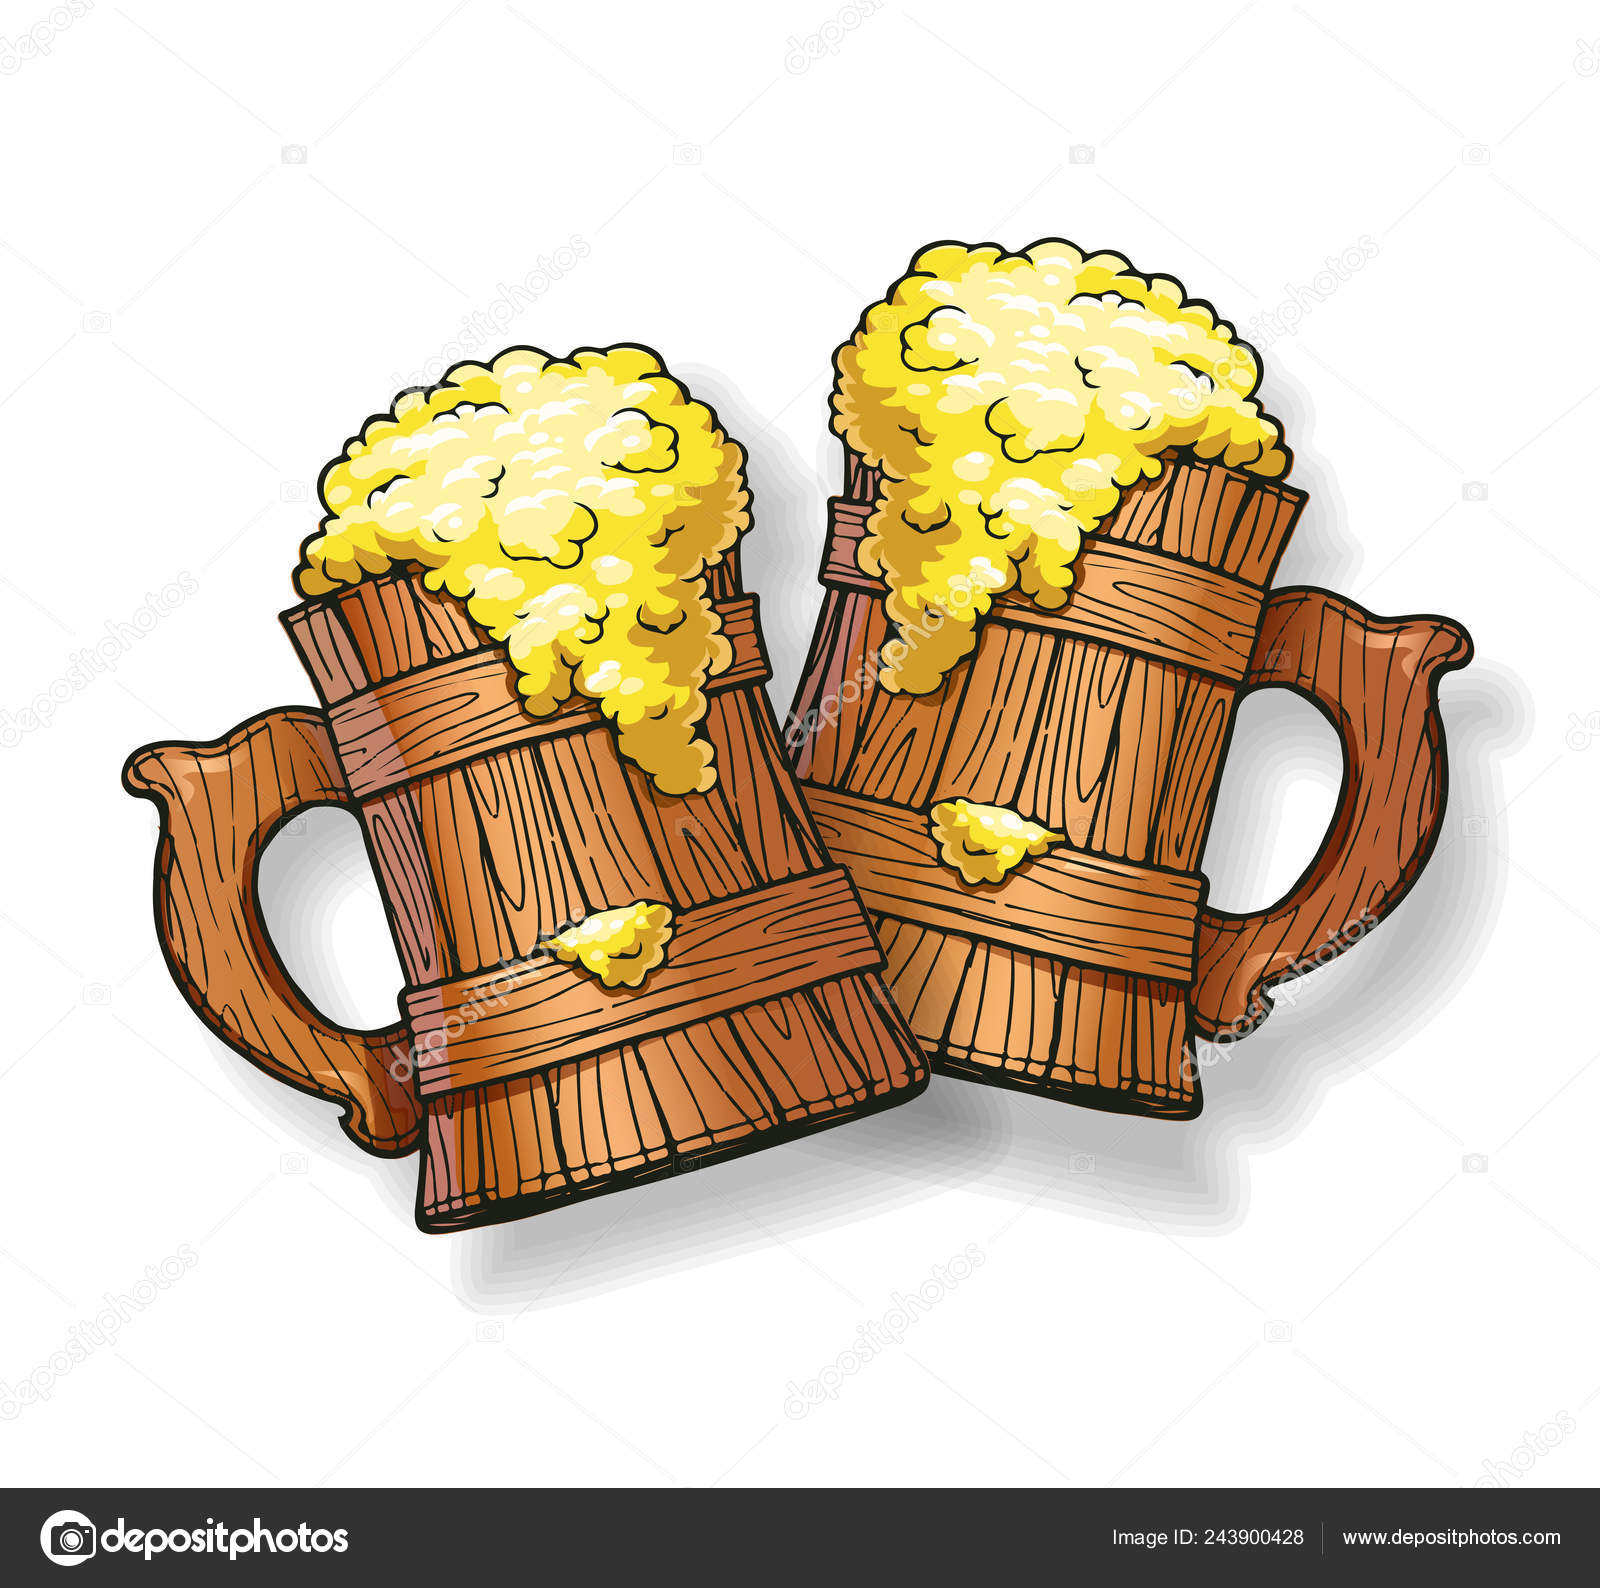 Download Wooden Beer Cup Mockup For Brewery Party Vector Illustration Vector Image By C Aleksangel Vector Stock 243900428